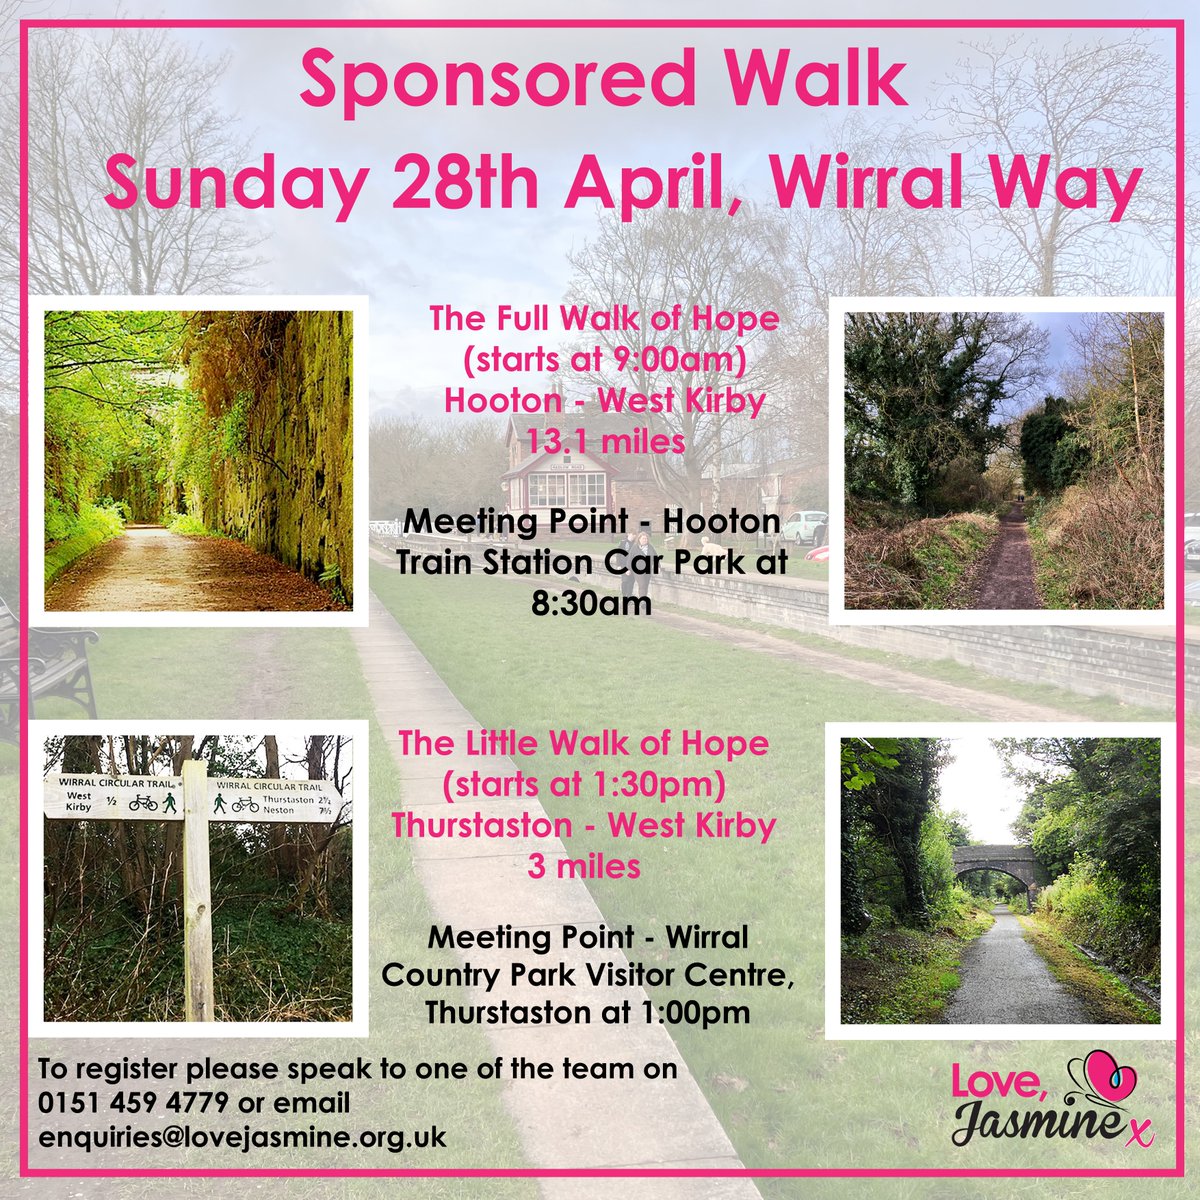 Our first ever sponsored walk is taking place on Sunday 28th April along the Wirral Way and we'd love it if you could join us.

If you'd like to take part, please email enquiries@lovejasmine.org.uk.

#bereavedfamilies #localcharity #exercise #nature #lovejasmine #adventure